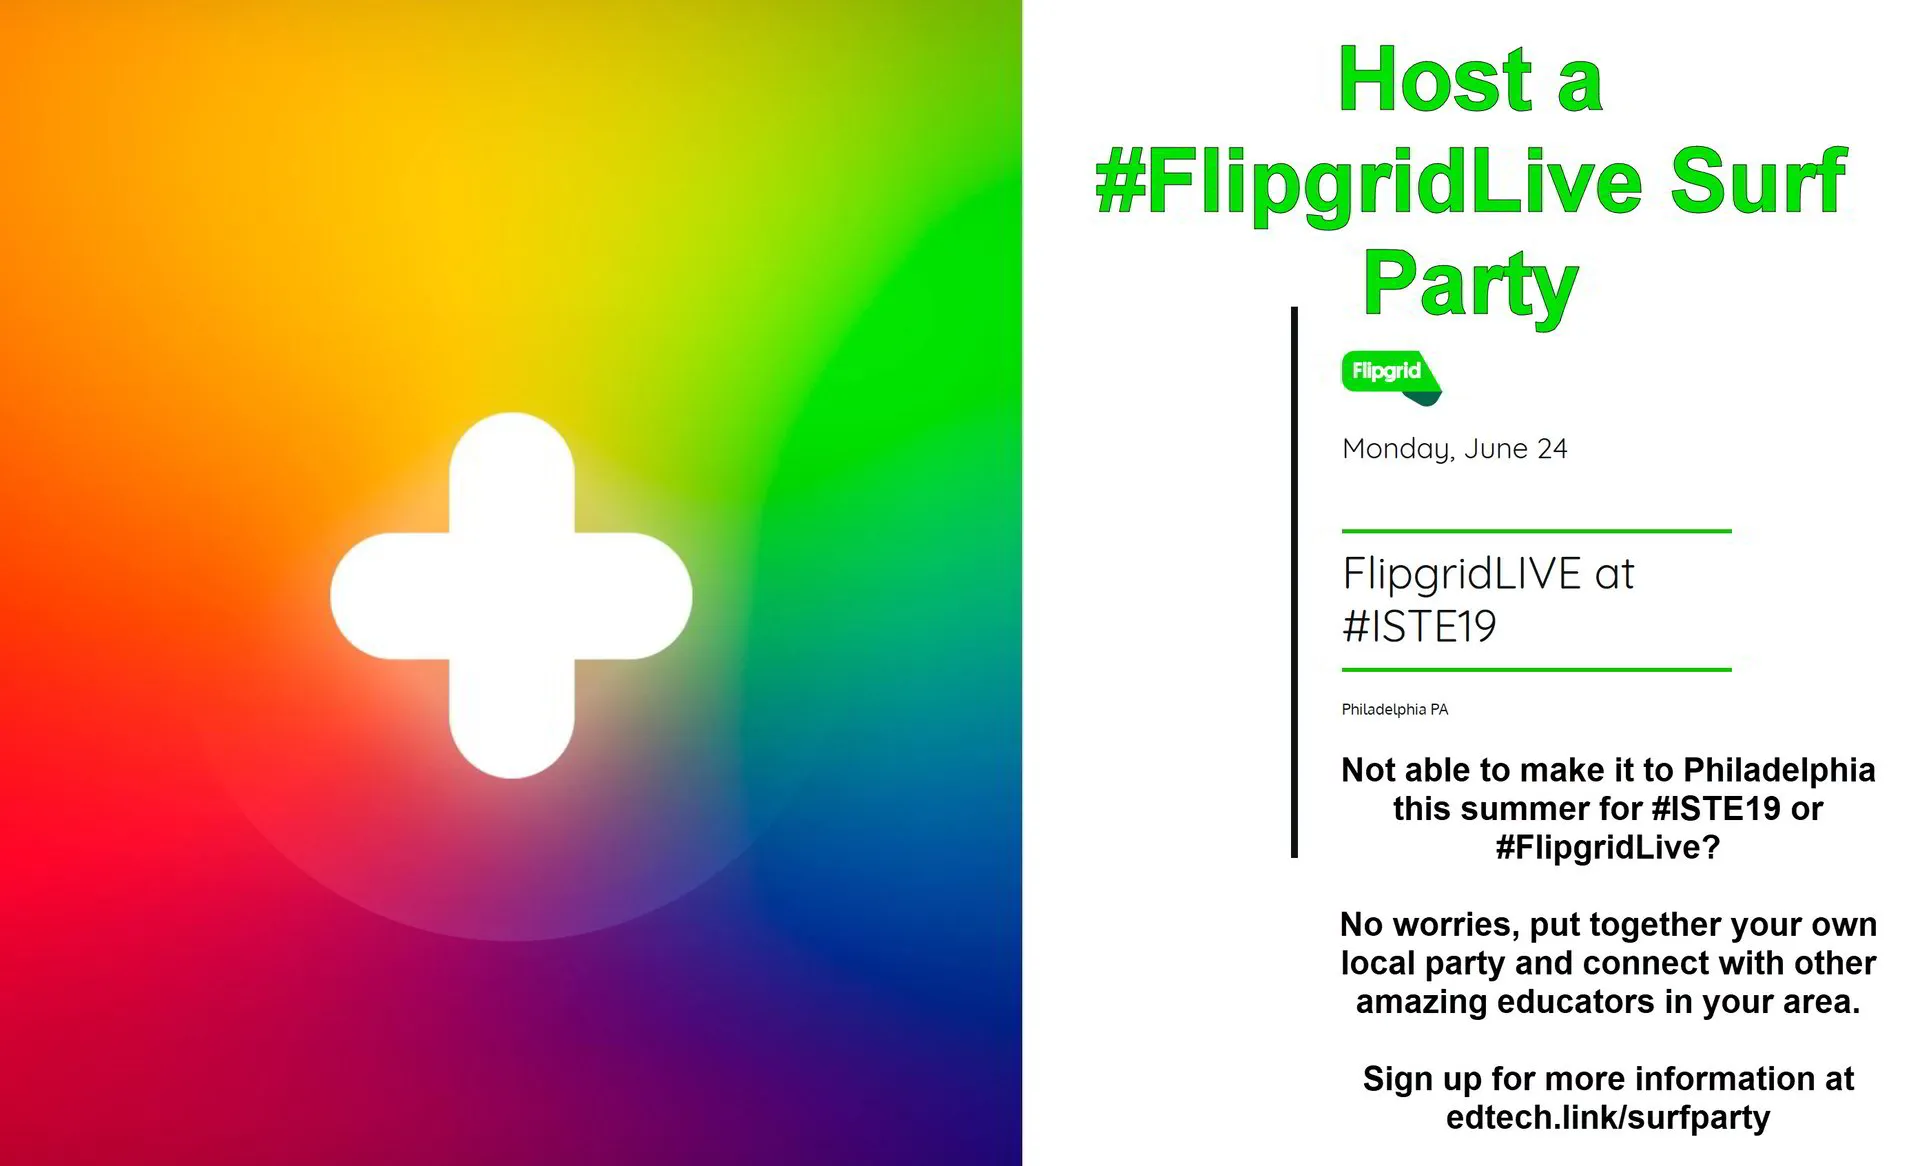 Flipgrid Live is Always Better with Friends - Host Your Own Surf Party!